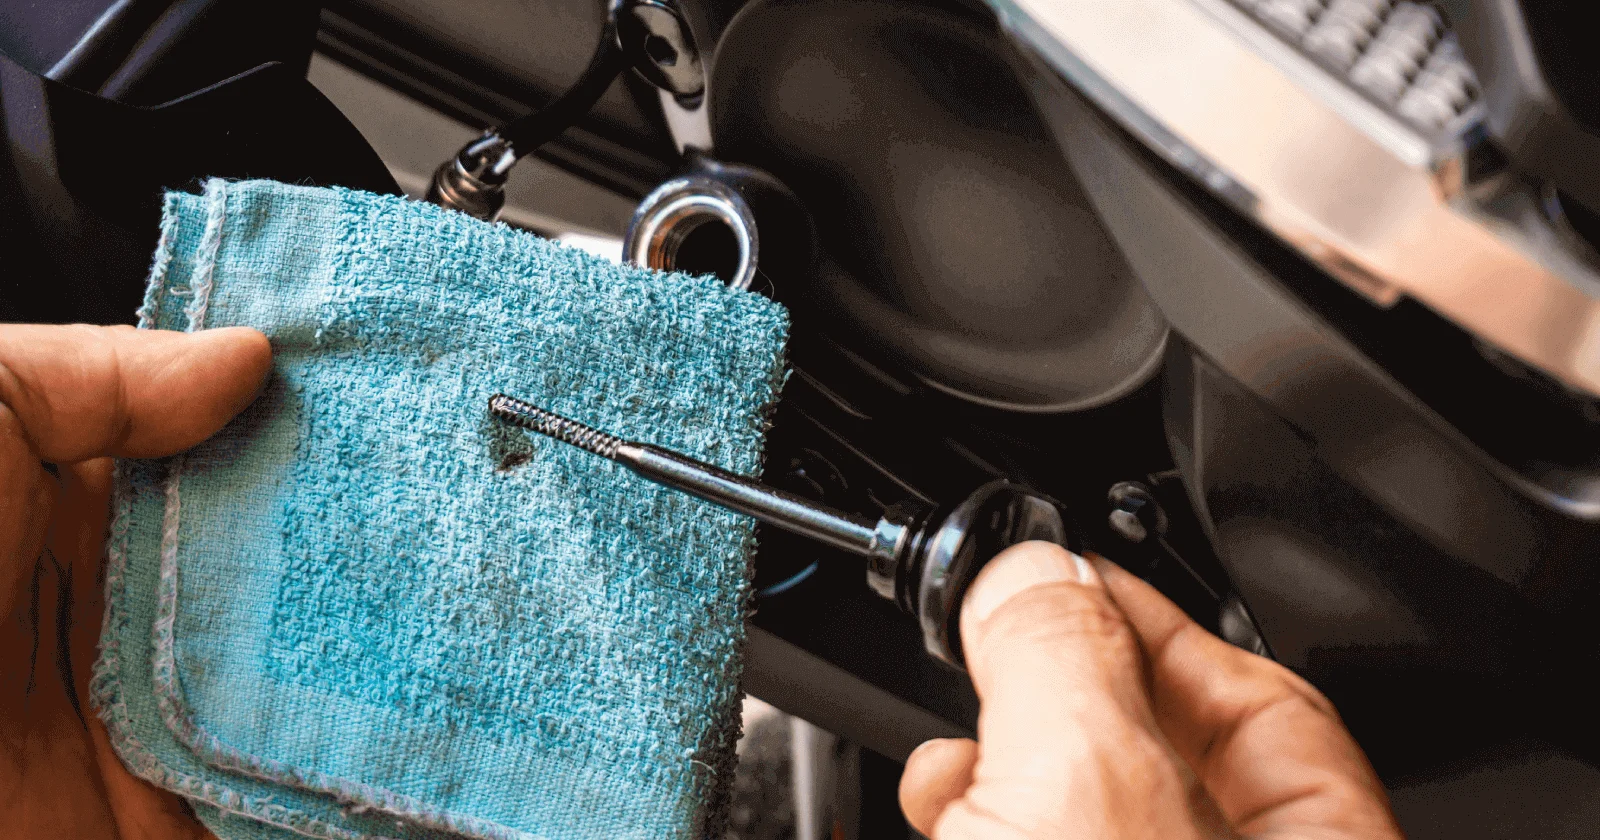 How to Check Whether Your Bike Engine Oil is Functioning as Required